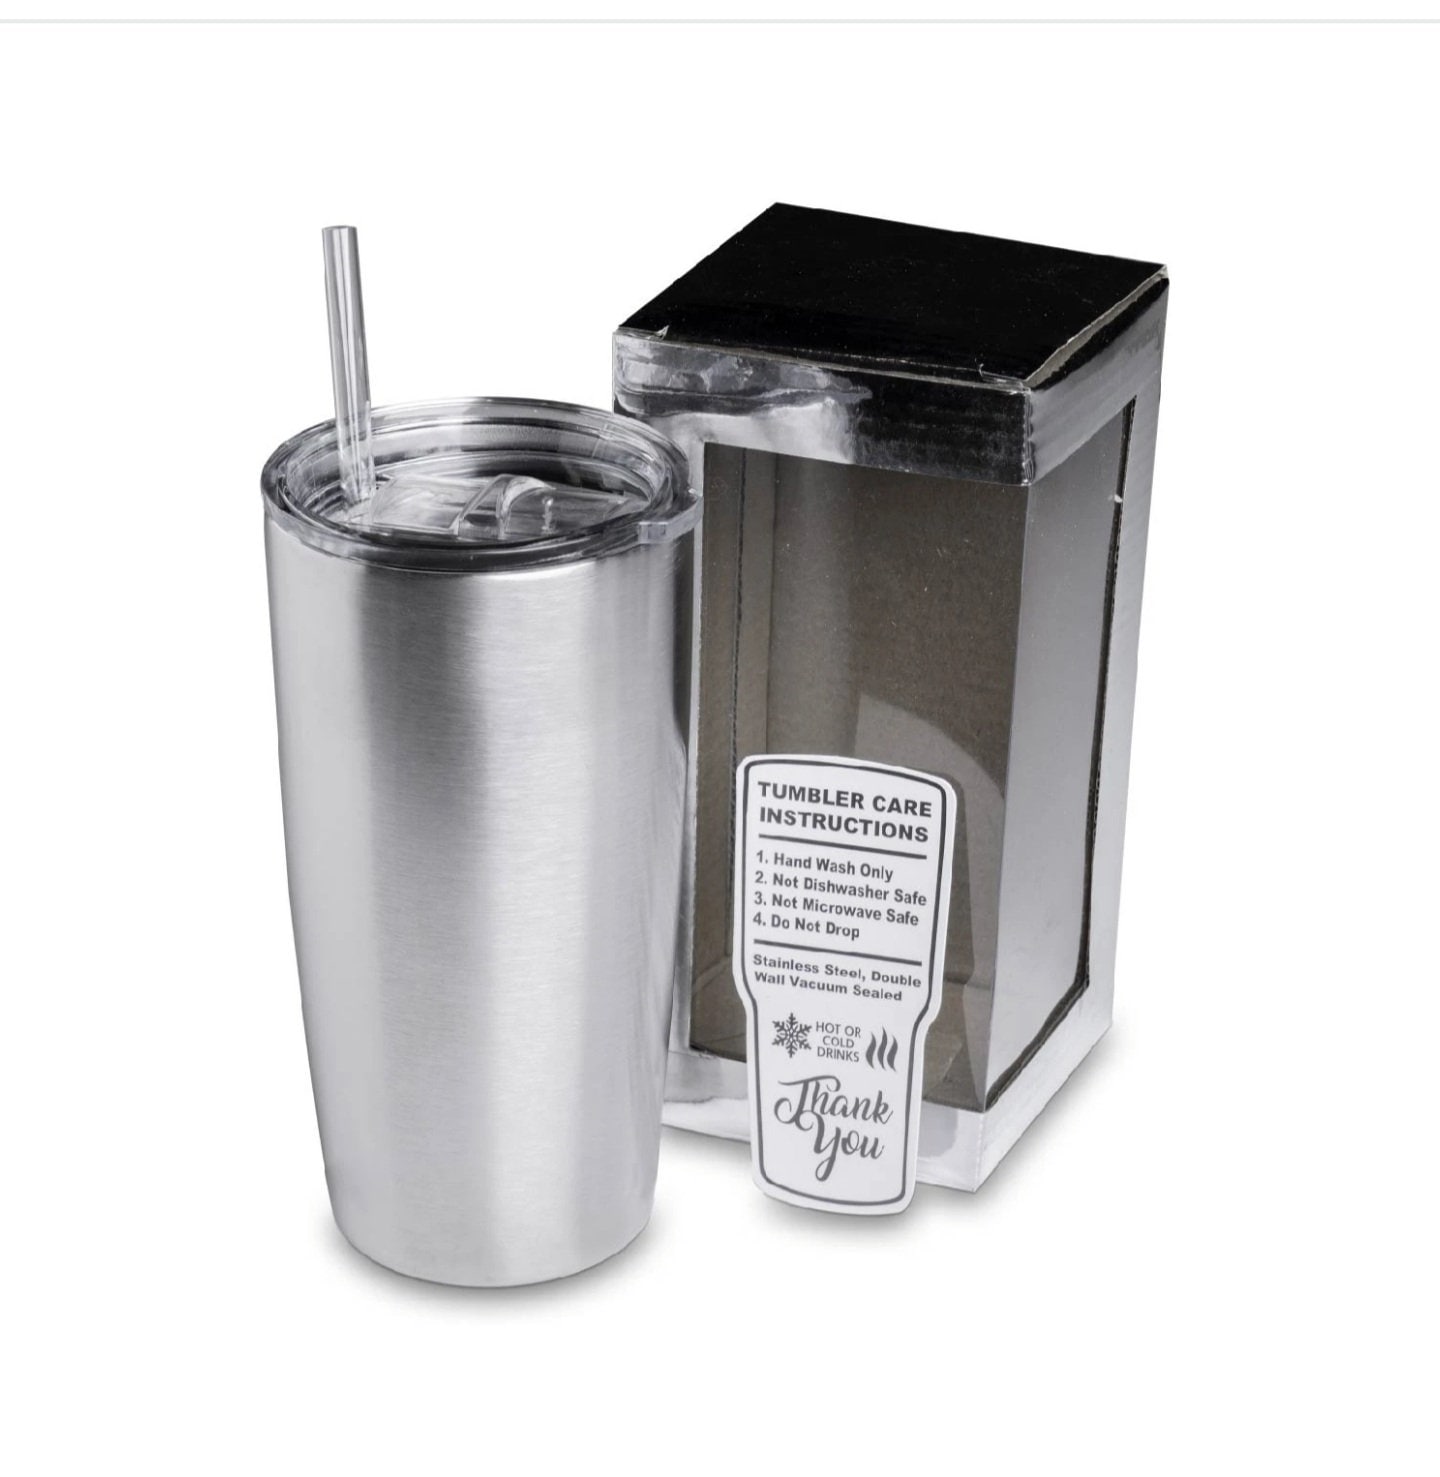 Josh Allen Jersey - 40oz Stainless Steel Tumbler with Lid & Straw – Store716